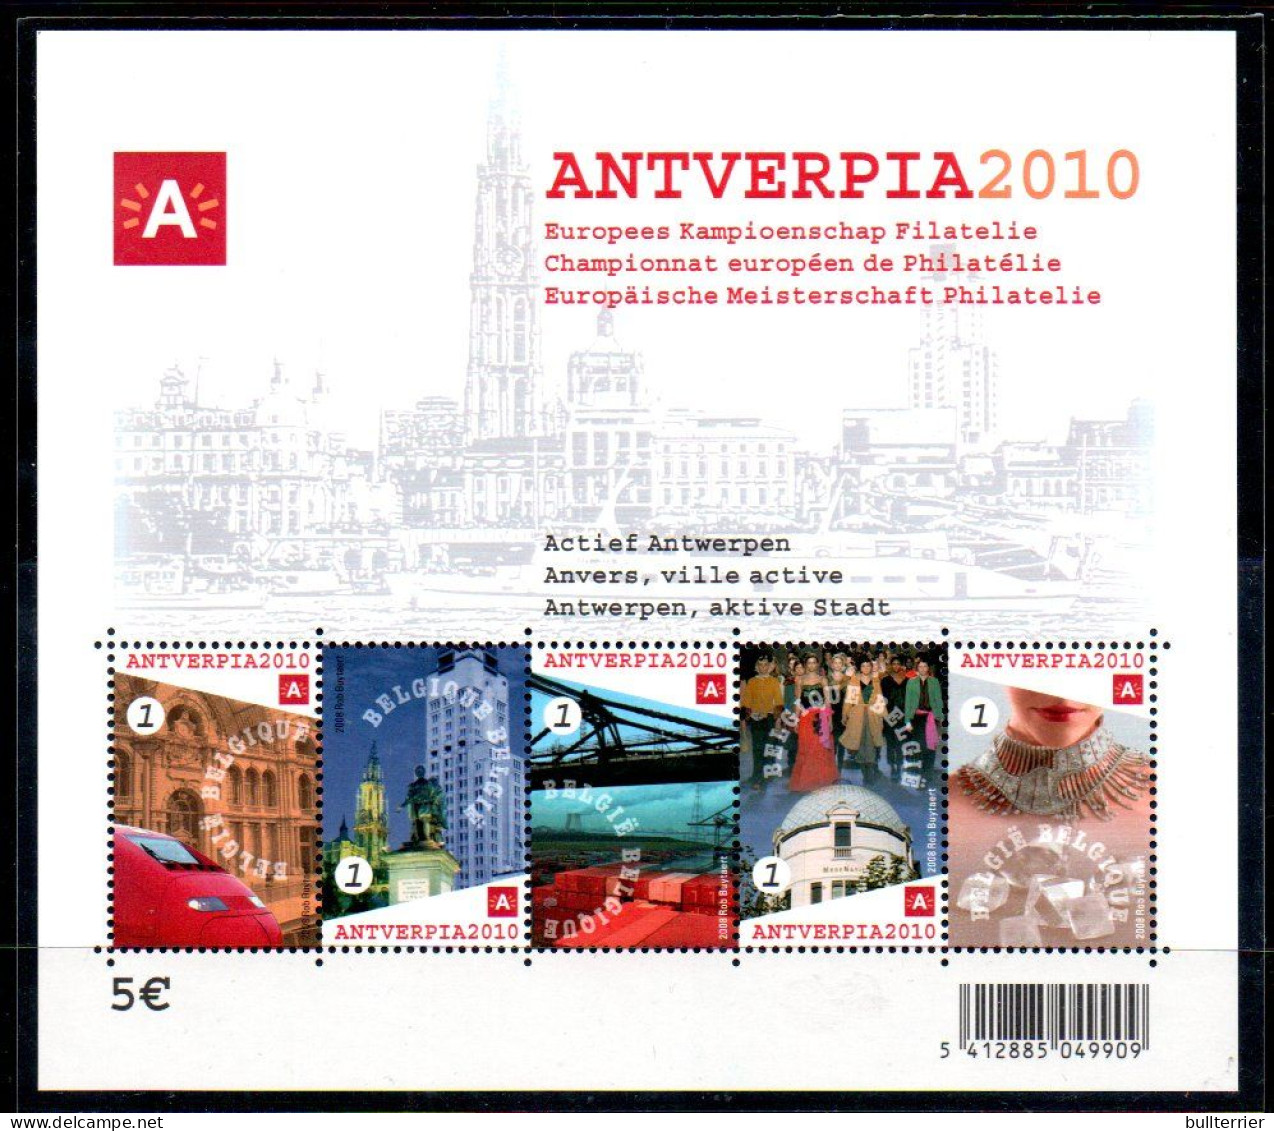 BELGIUM - 2008 - ANTWERP STAMP CHAMPIONSHIPS S/SHEET MINT NEVER HINGED , SG CAT £23 - Unused Stamps